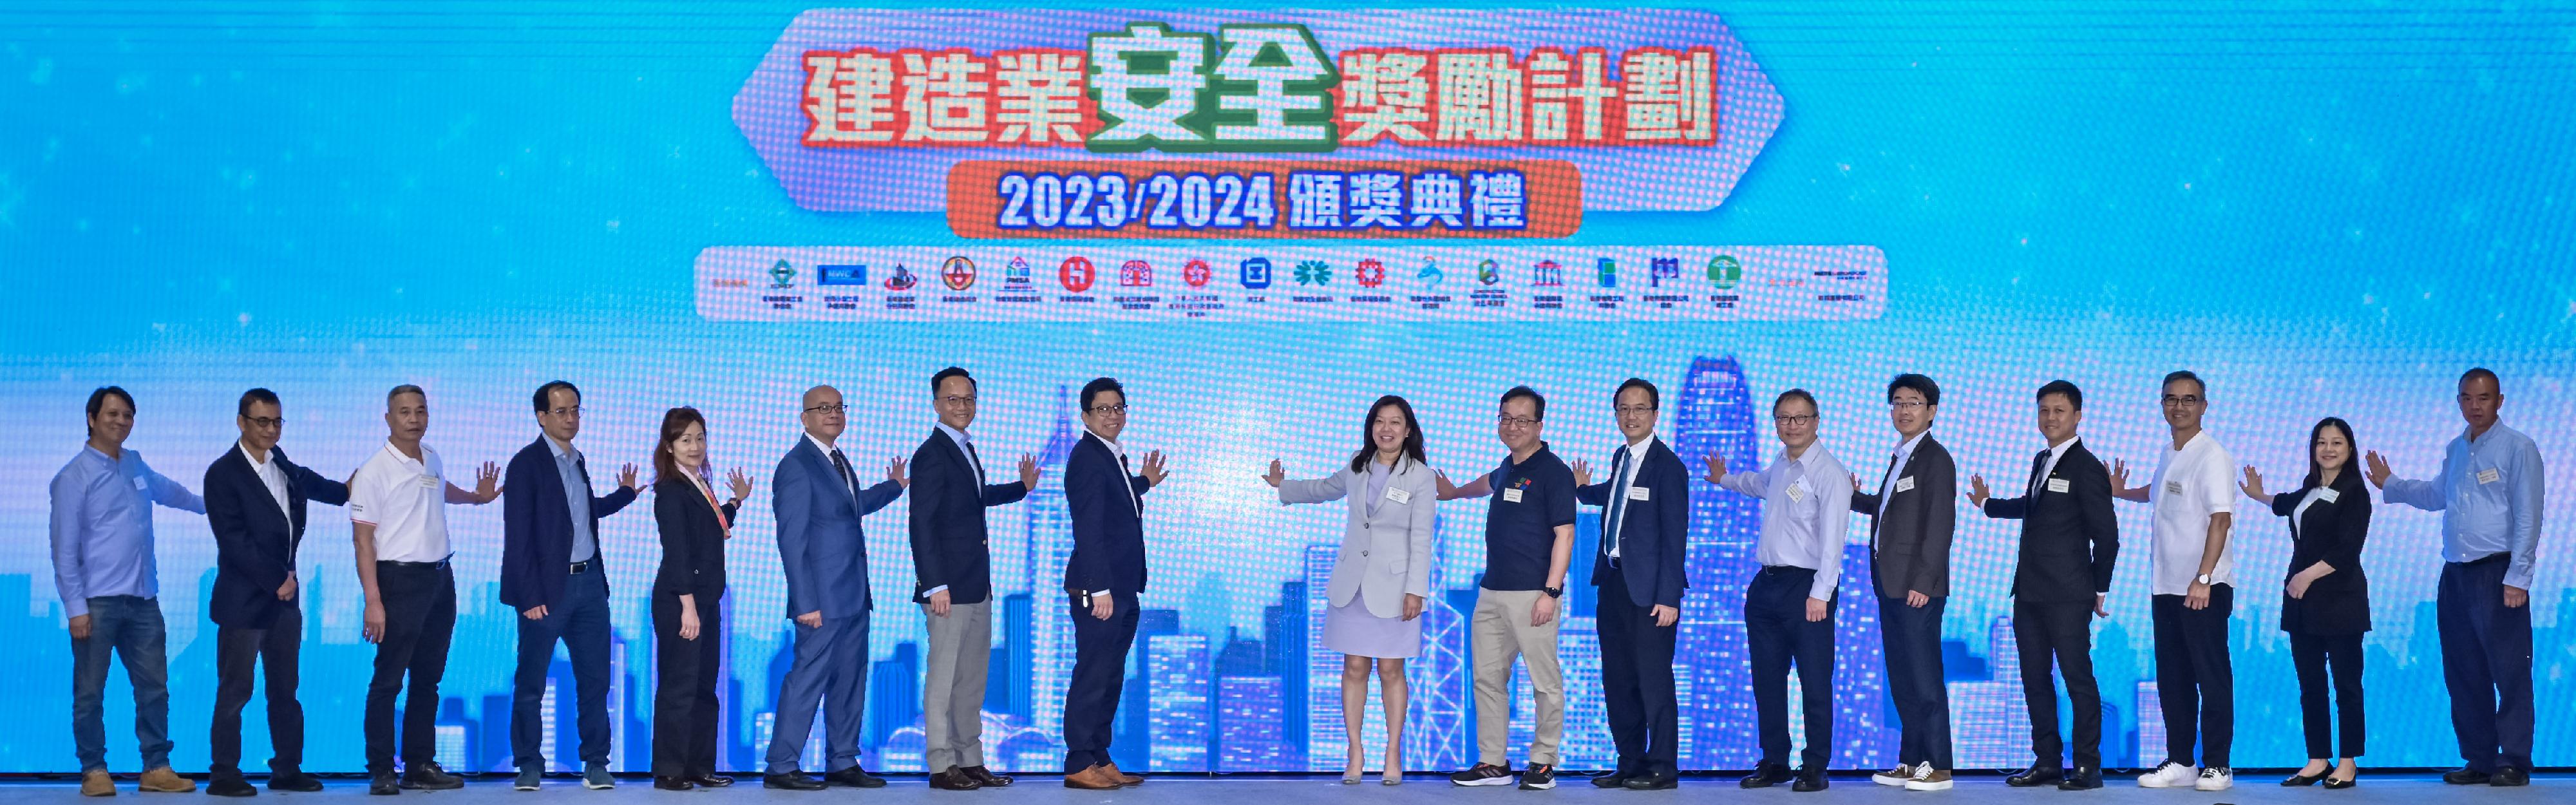 The Labour Department held the Award Presentation Ceremony cum Fun Day of the Construction Industry Safety Award Scheme today (April 28). Photo shows the Commissioner for Labour, Ms May Chan (centre); the Vice-Chairman of the Occupational Safety and Health Council, Dr Lam Chor-yin (eighth right); the Chairman of the Occupational Deafness Compensation Board, Dr Thomas Tsang (sixth right), and other guests officiating at the ceremony.